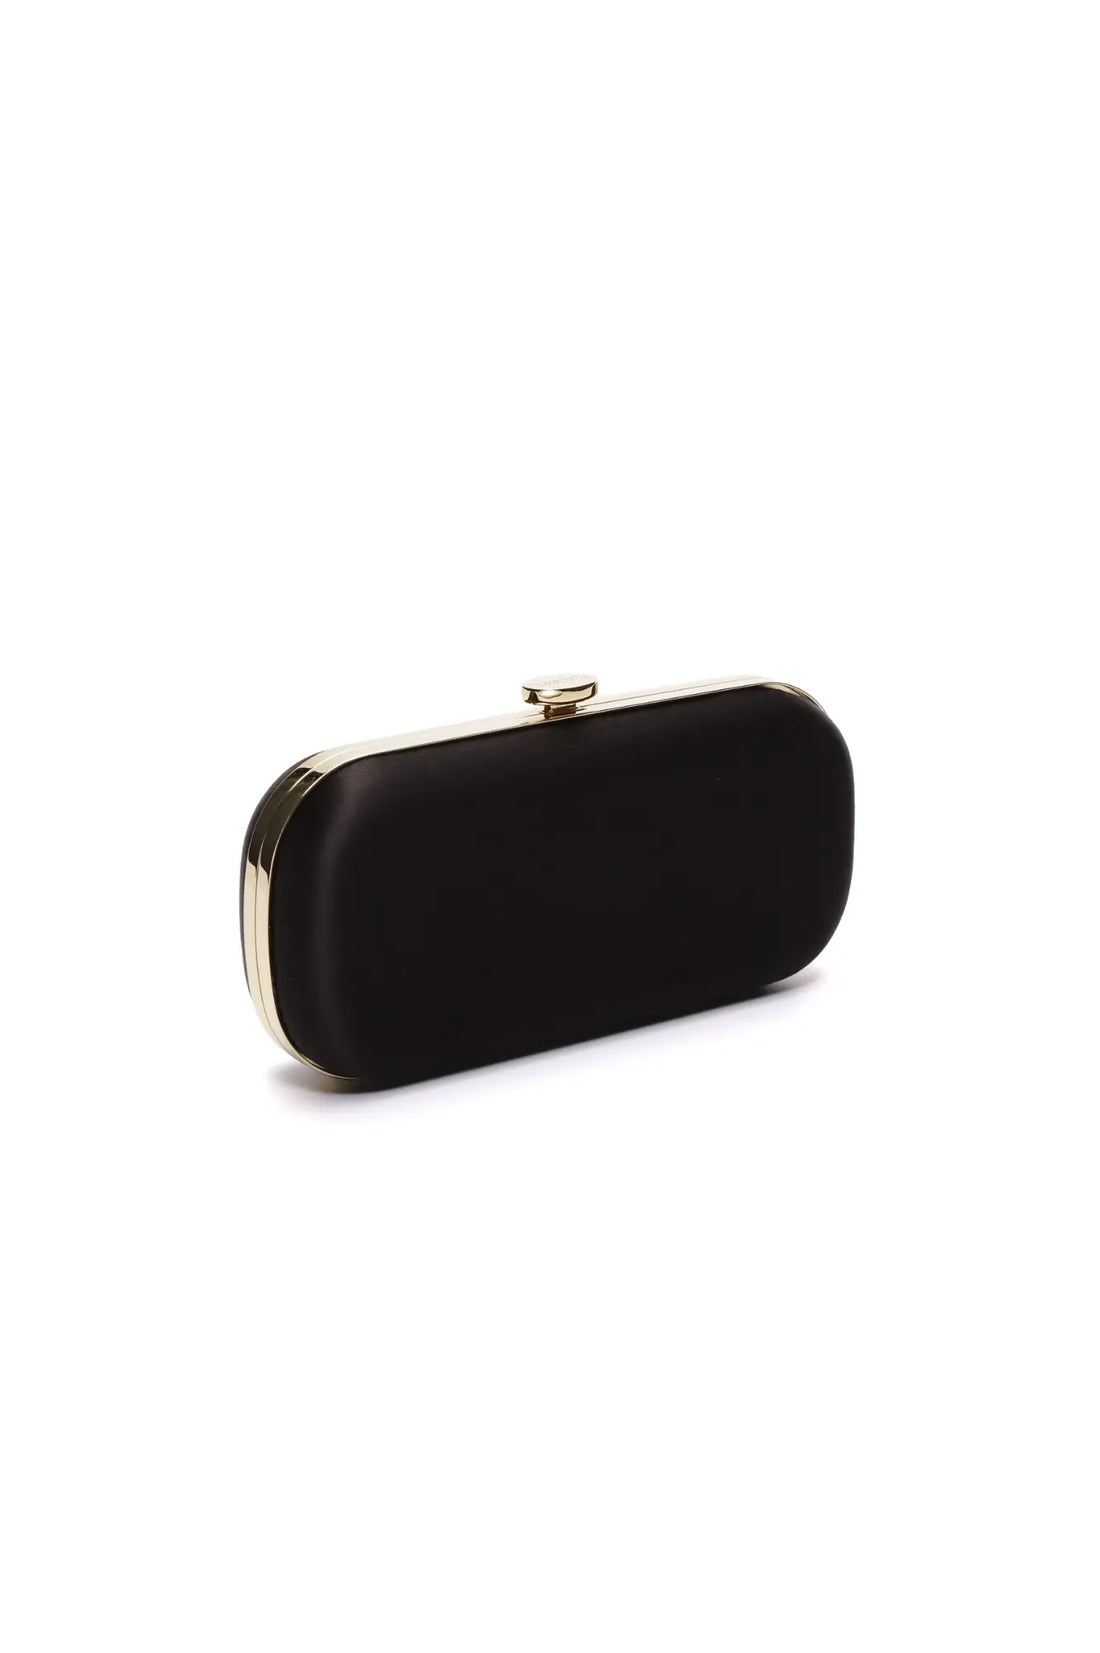 The sentence becomes: Bella Clutch Black Petite with gold detailing on white background by The Bella Rosa Collection.